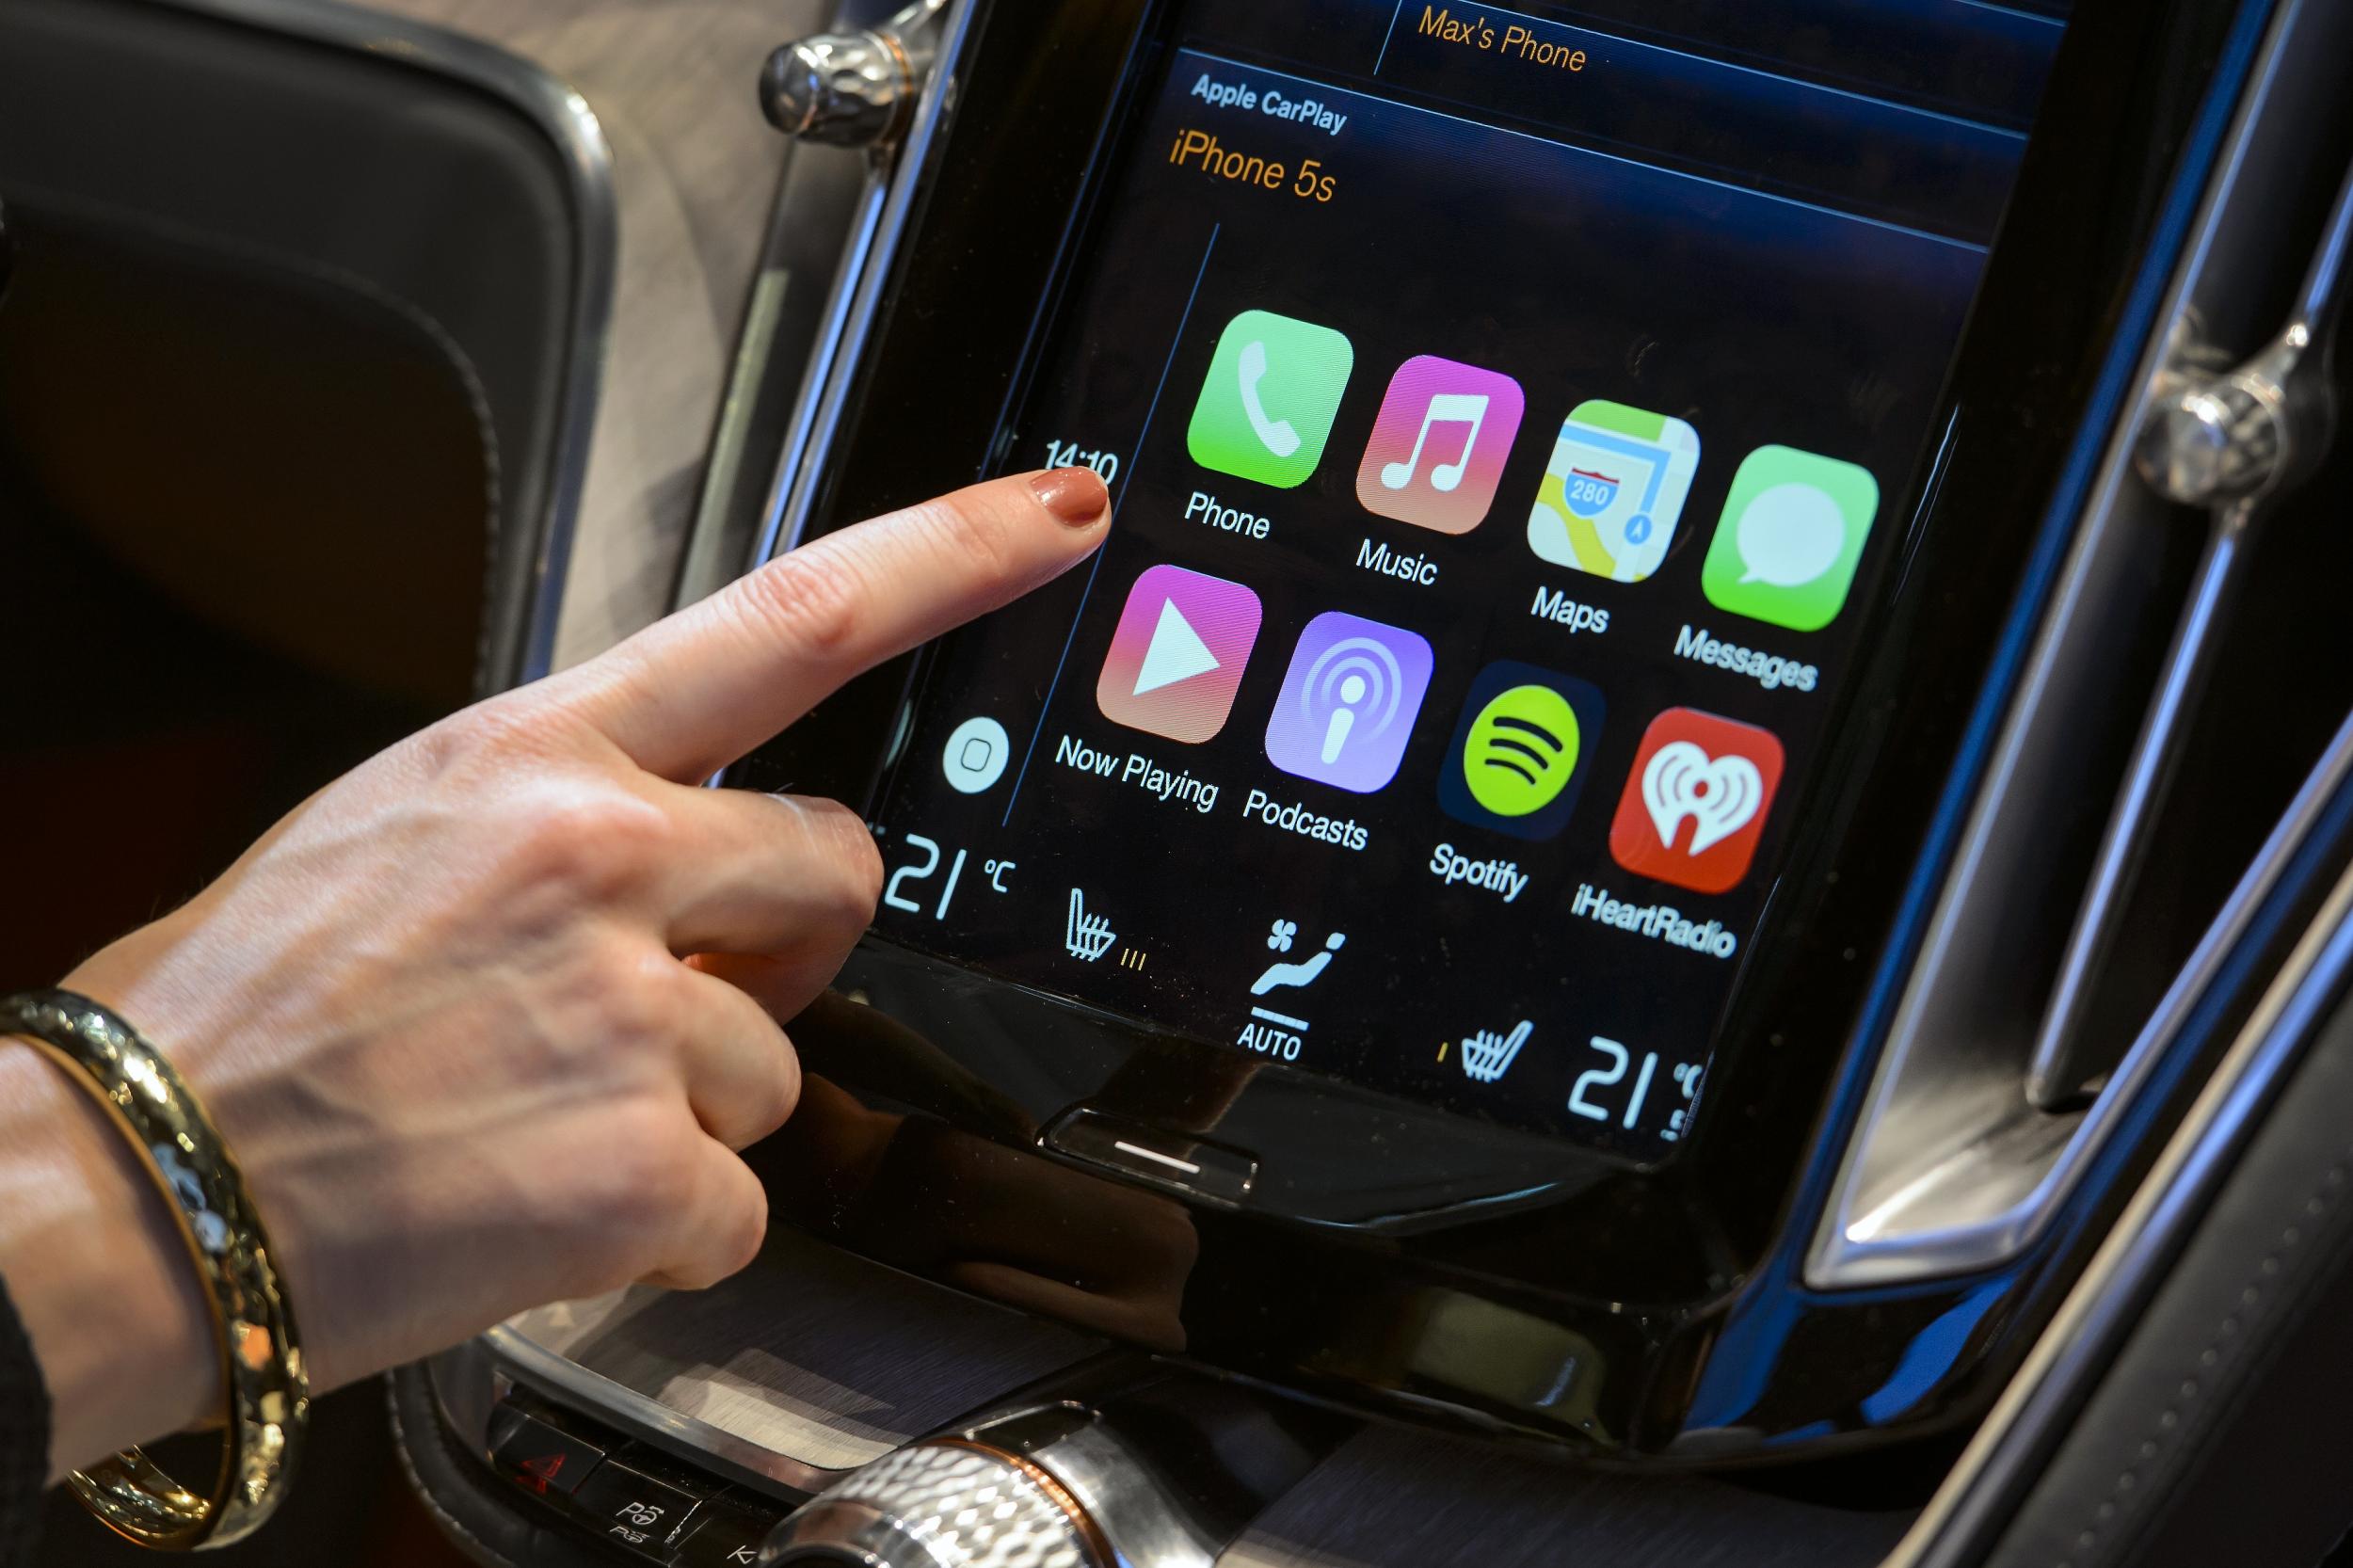 Apple's CarPlay car-based operating system is one of its first forays into the automotive world